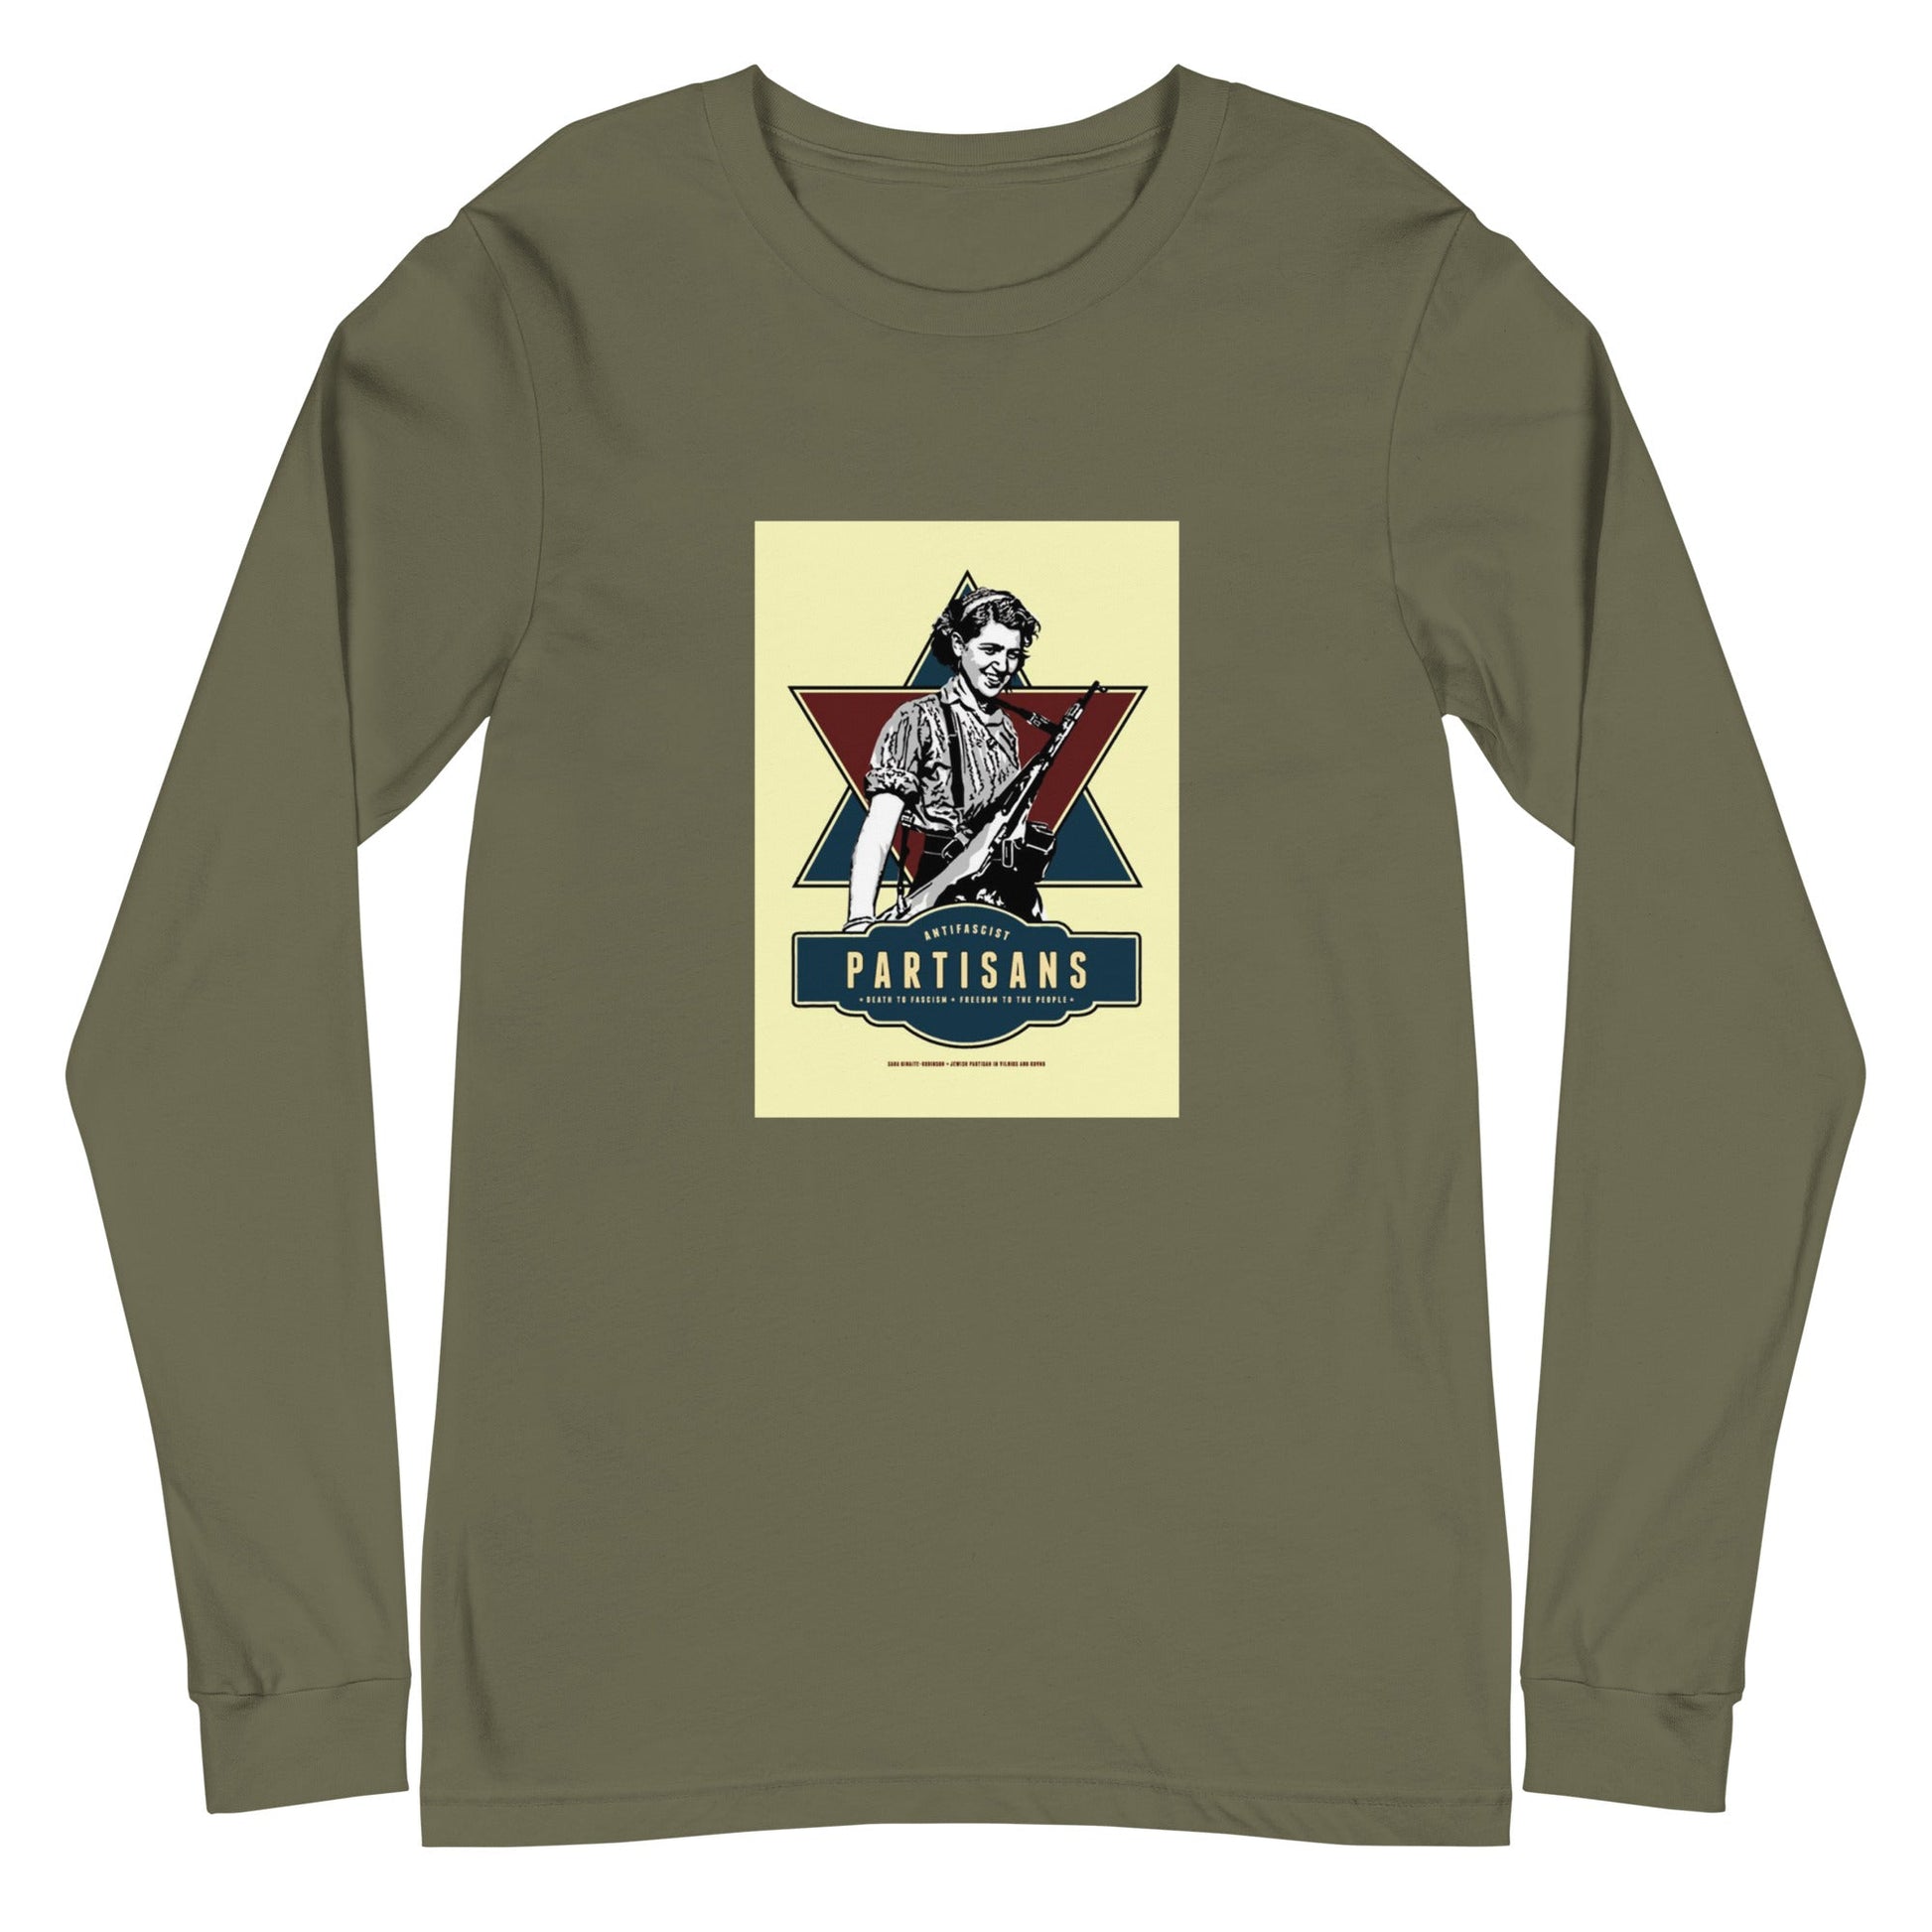 Partisans - Unisex Long Sleeve Tee - Souled Out World